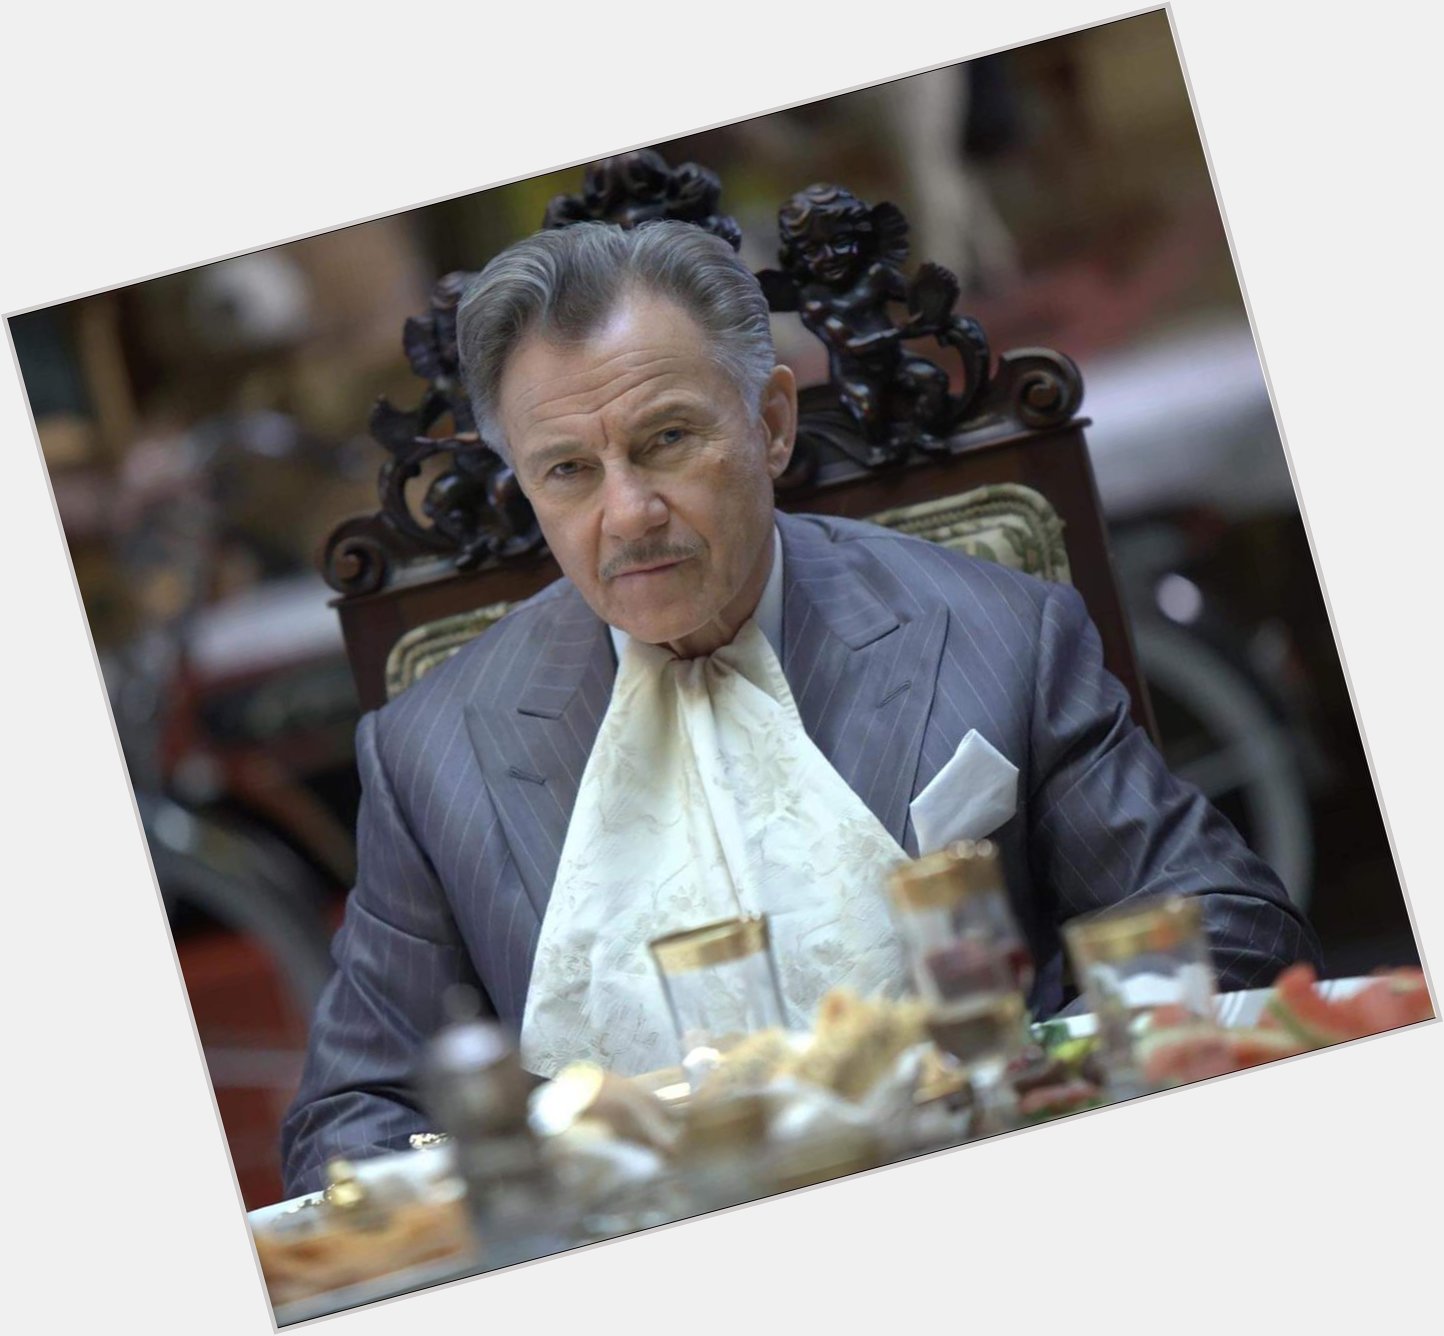   Happy 84th birthday to the great actor, Harvey Keitel (The Last Godfather 2010) 